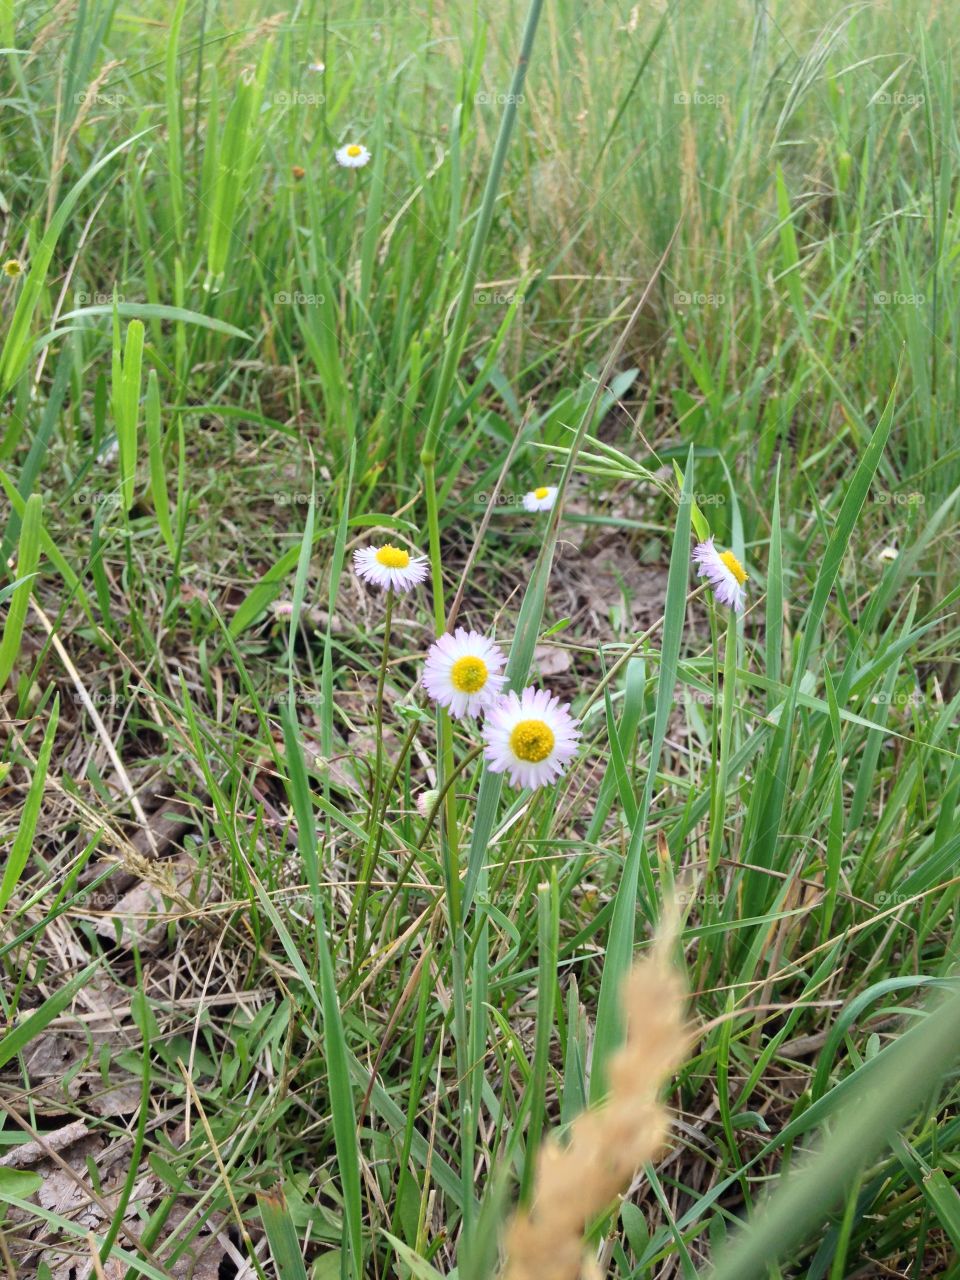 Mountaintop daisies . Came upon these daisies while exploring the wooded mountain at around 9500 feet